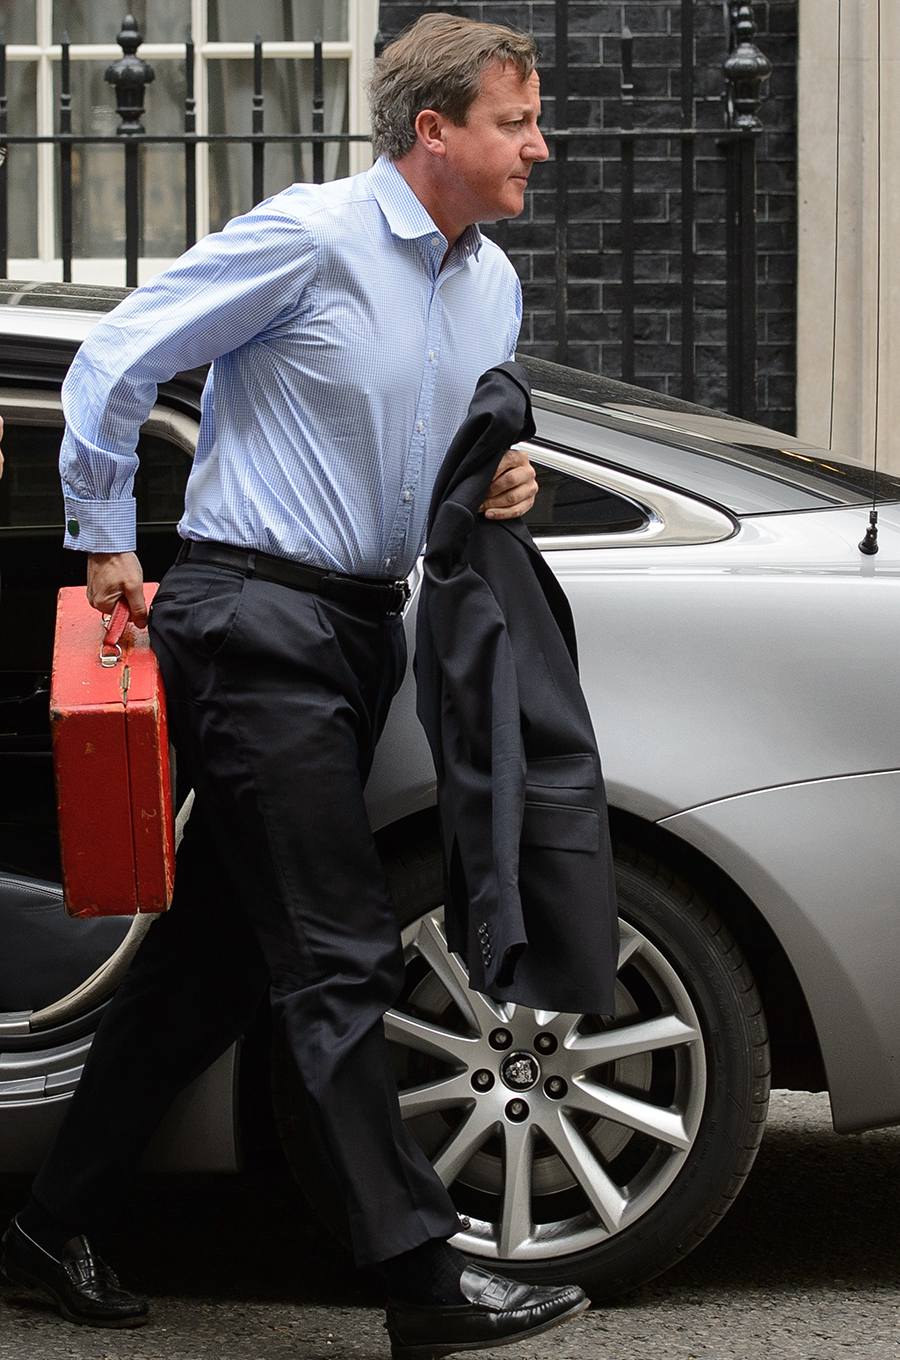 British Prime Minister David Cameron arrives back in Downing Street yesterday after breaking off his holiday early for talks on the threat posed by Islamic State jihadists following the 'shocking and depraved' apparent beheading of US journalist James Fol